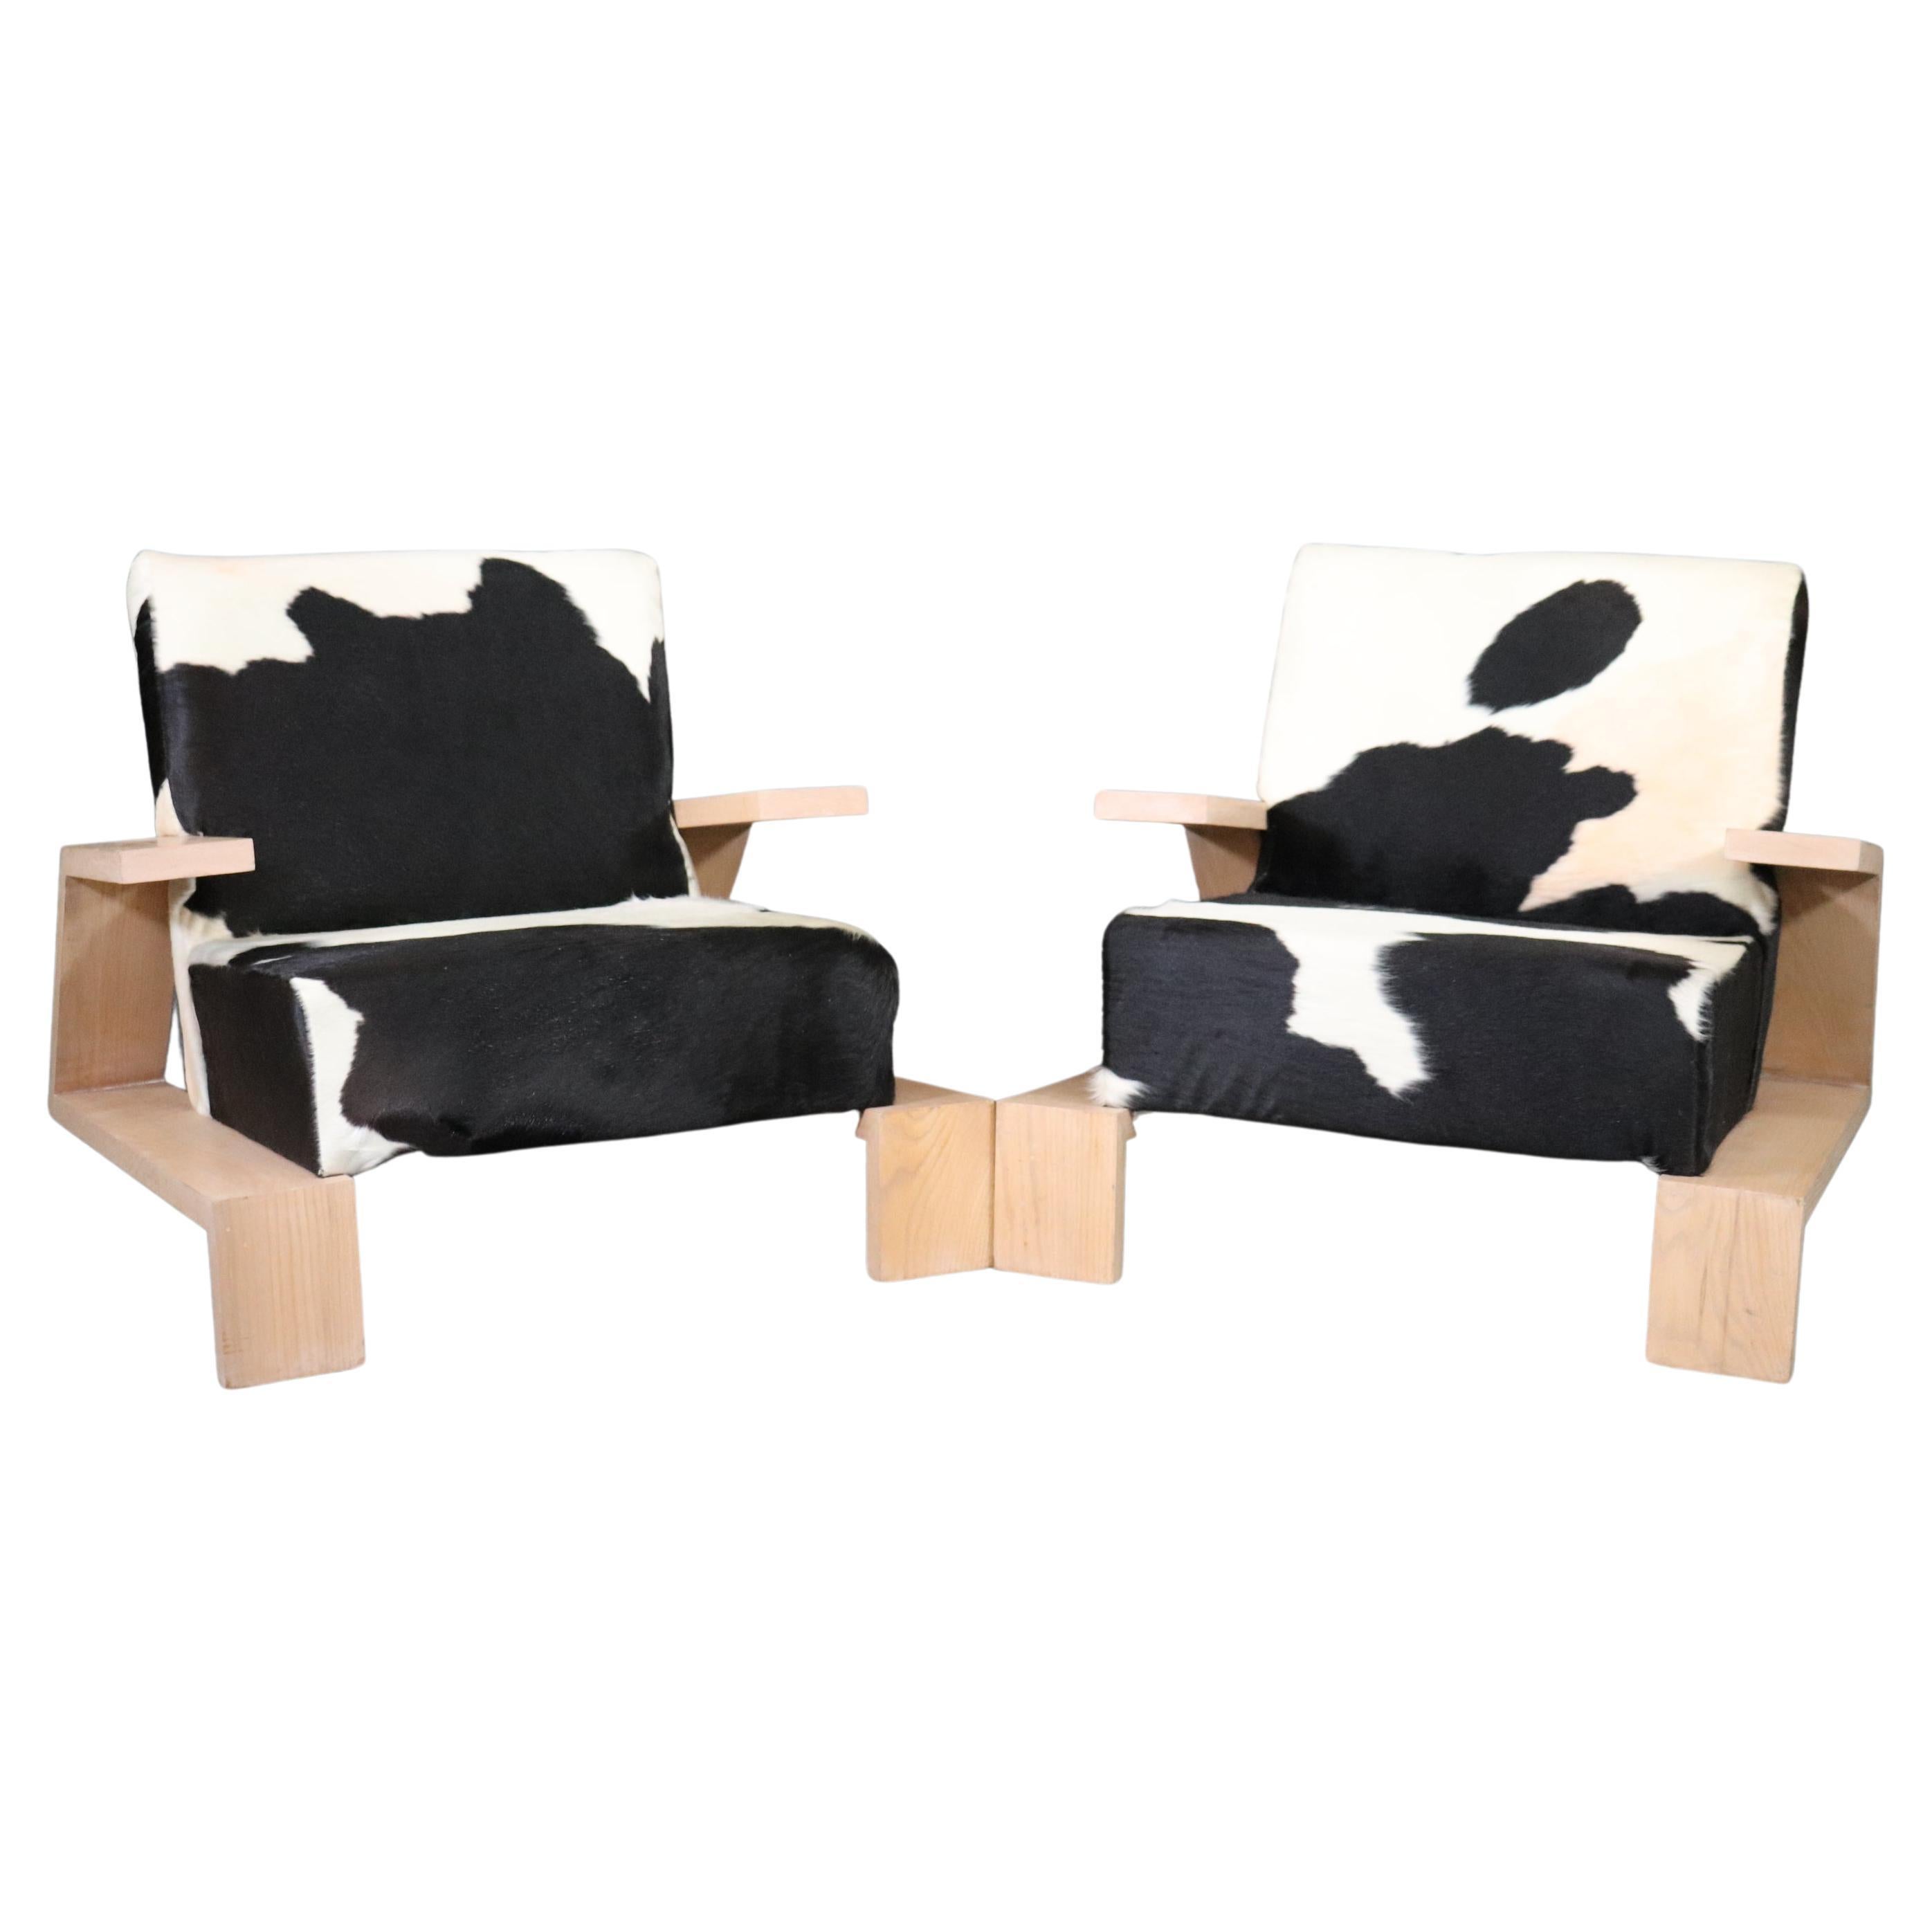 Pair of Mid-Century Modern Cerused Oak Elephant Chairs in Cowhide For Sale